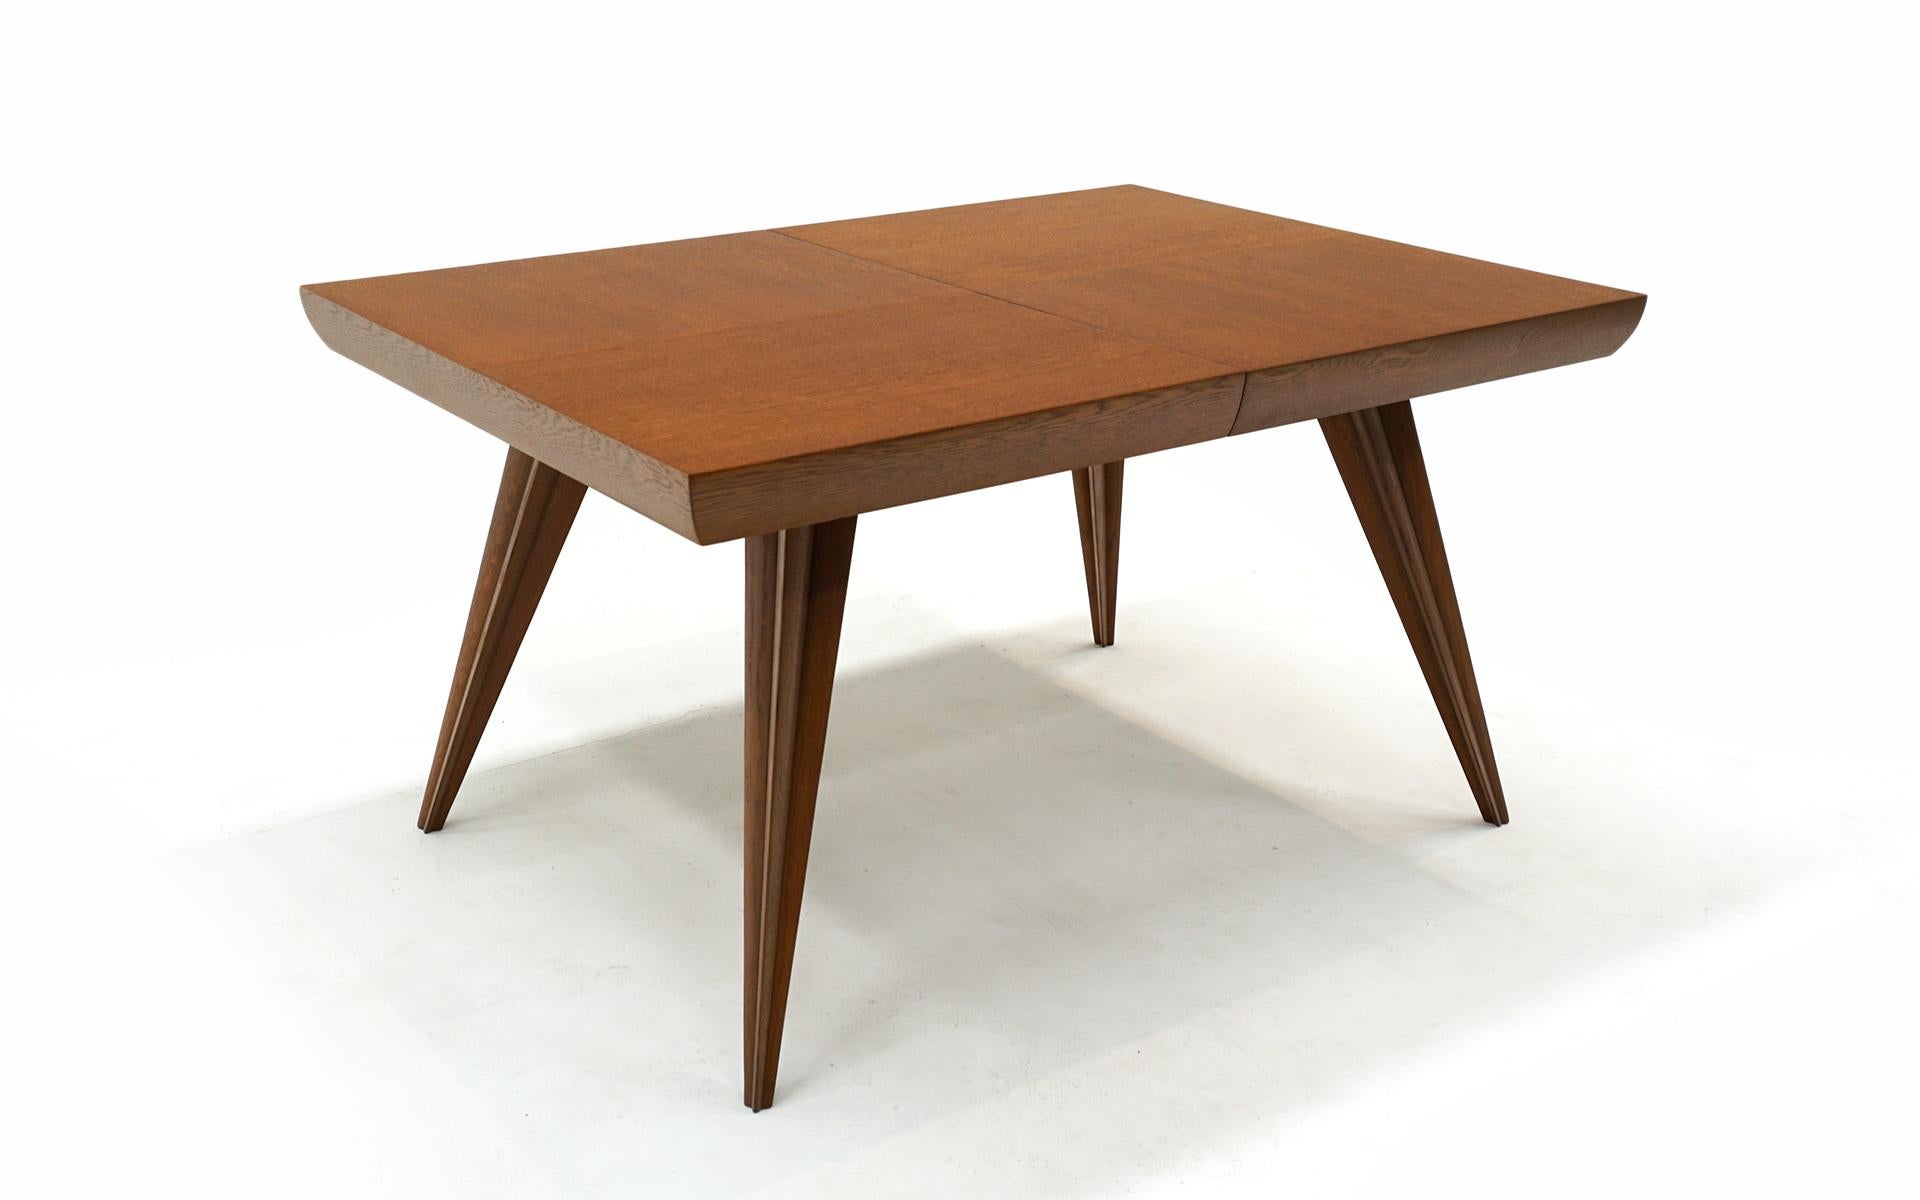 One of a kind custom ordered dining table designed by Vladimir Kagan for Kagan-Dreyfuss, late 1940s.  Patterned Oak top with classic Kagan sculptural legs.  Starts at 54 inches in length.  Two leaves, each being 18 inches make the table 90 inches